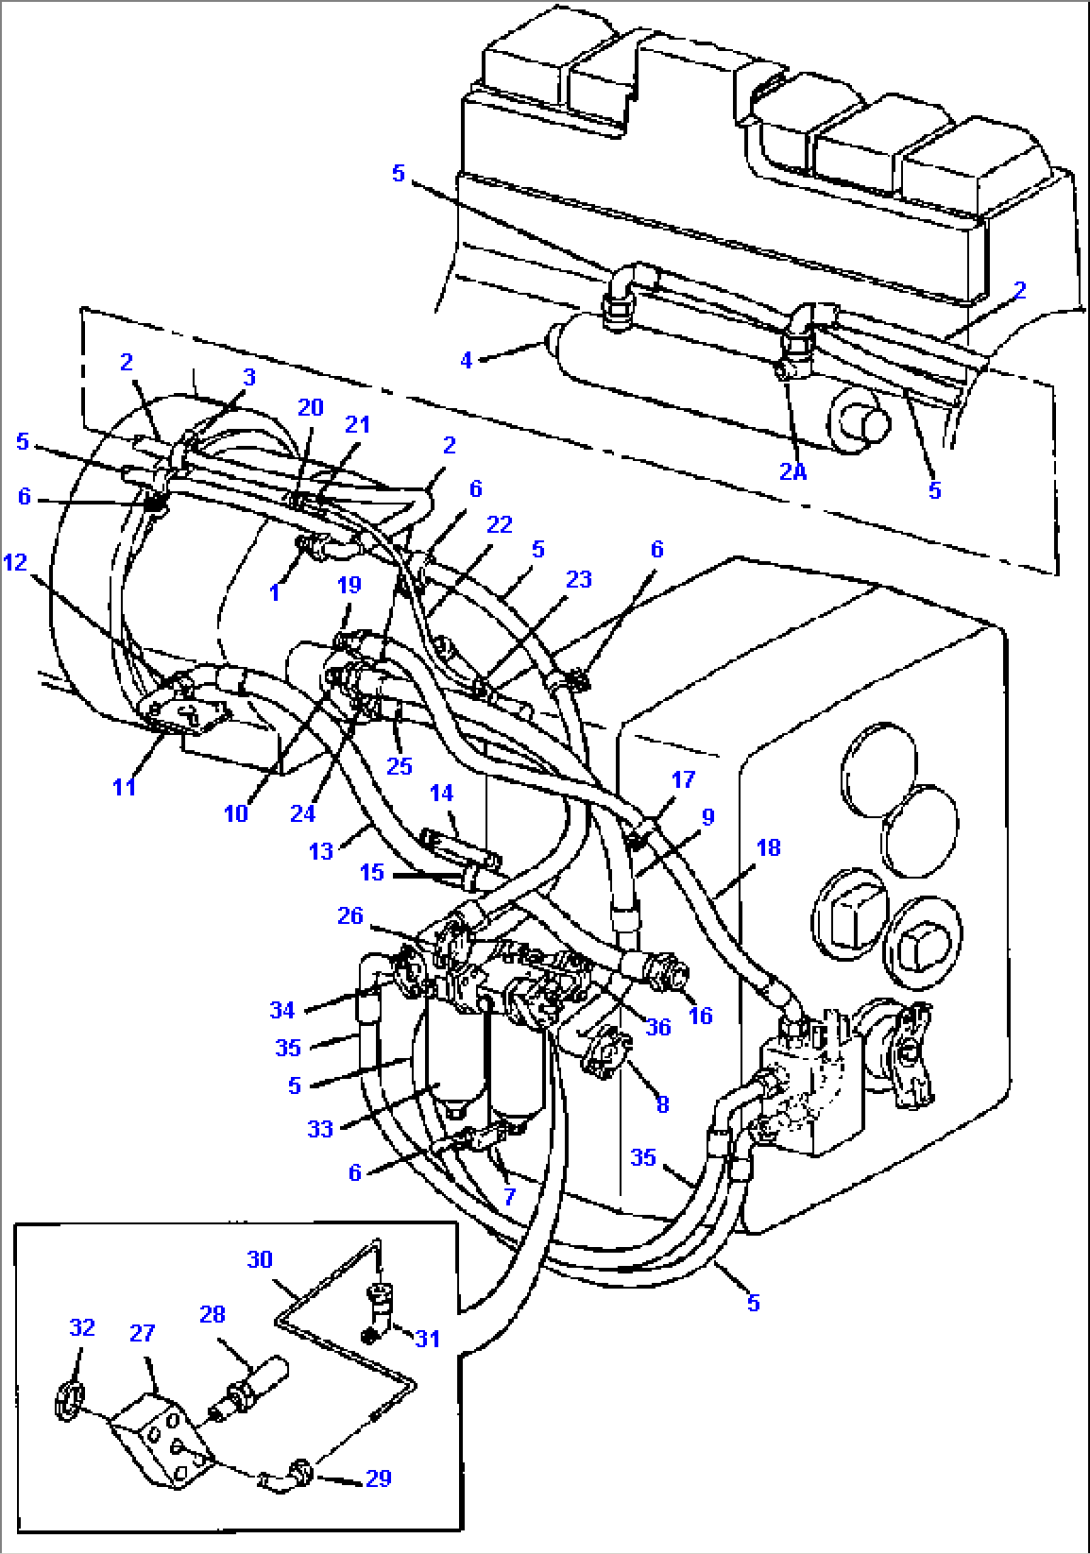 HYDRAULIC PIPING TRANSMISSION AND TORQUE CONVERTER